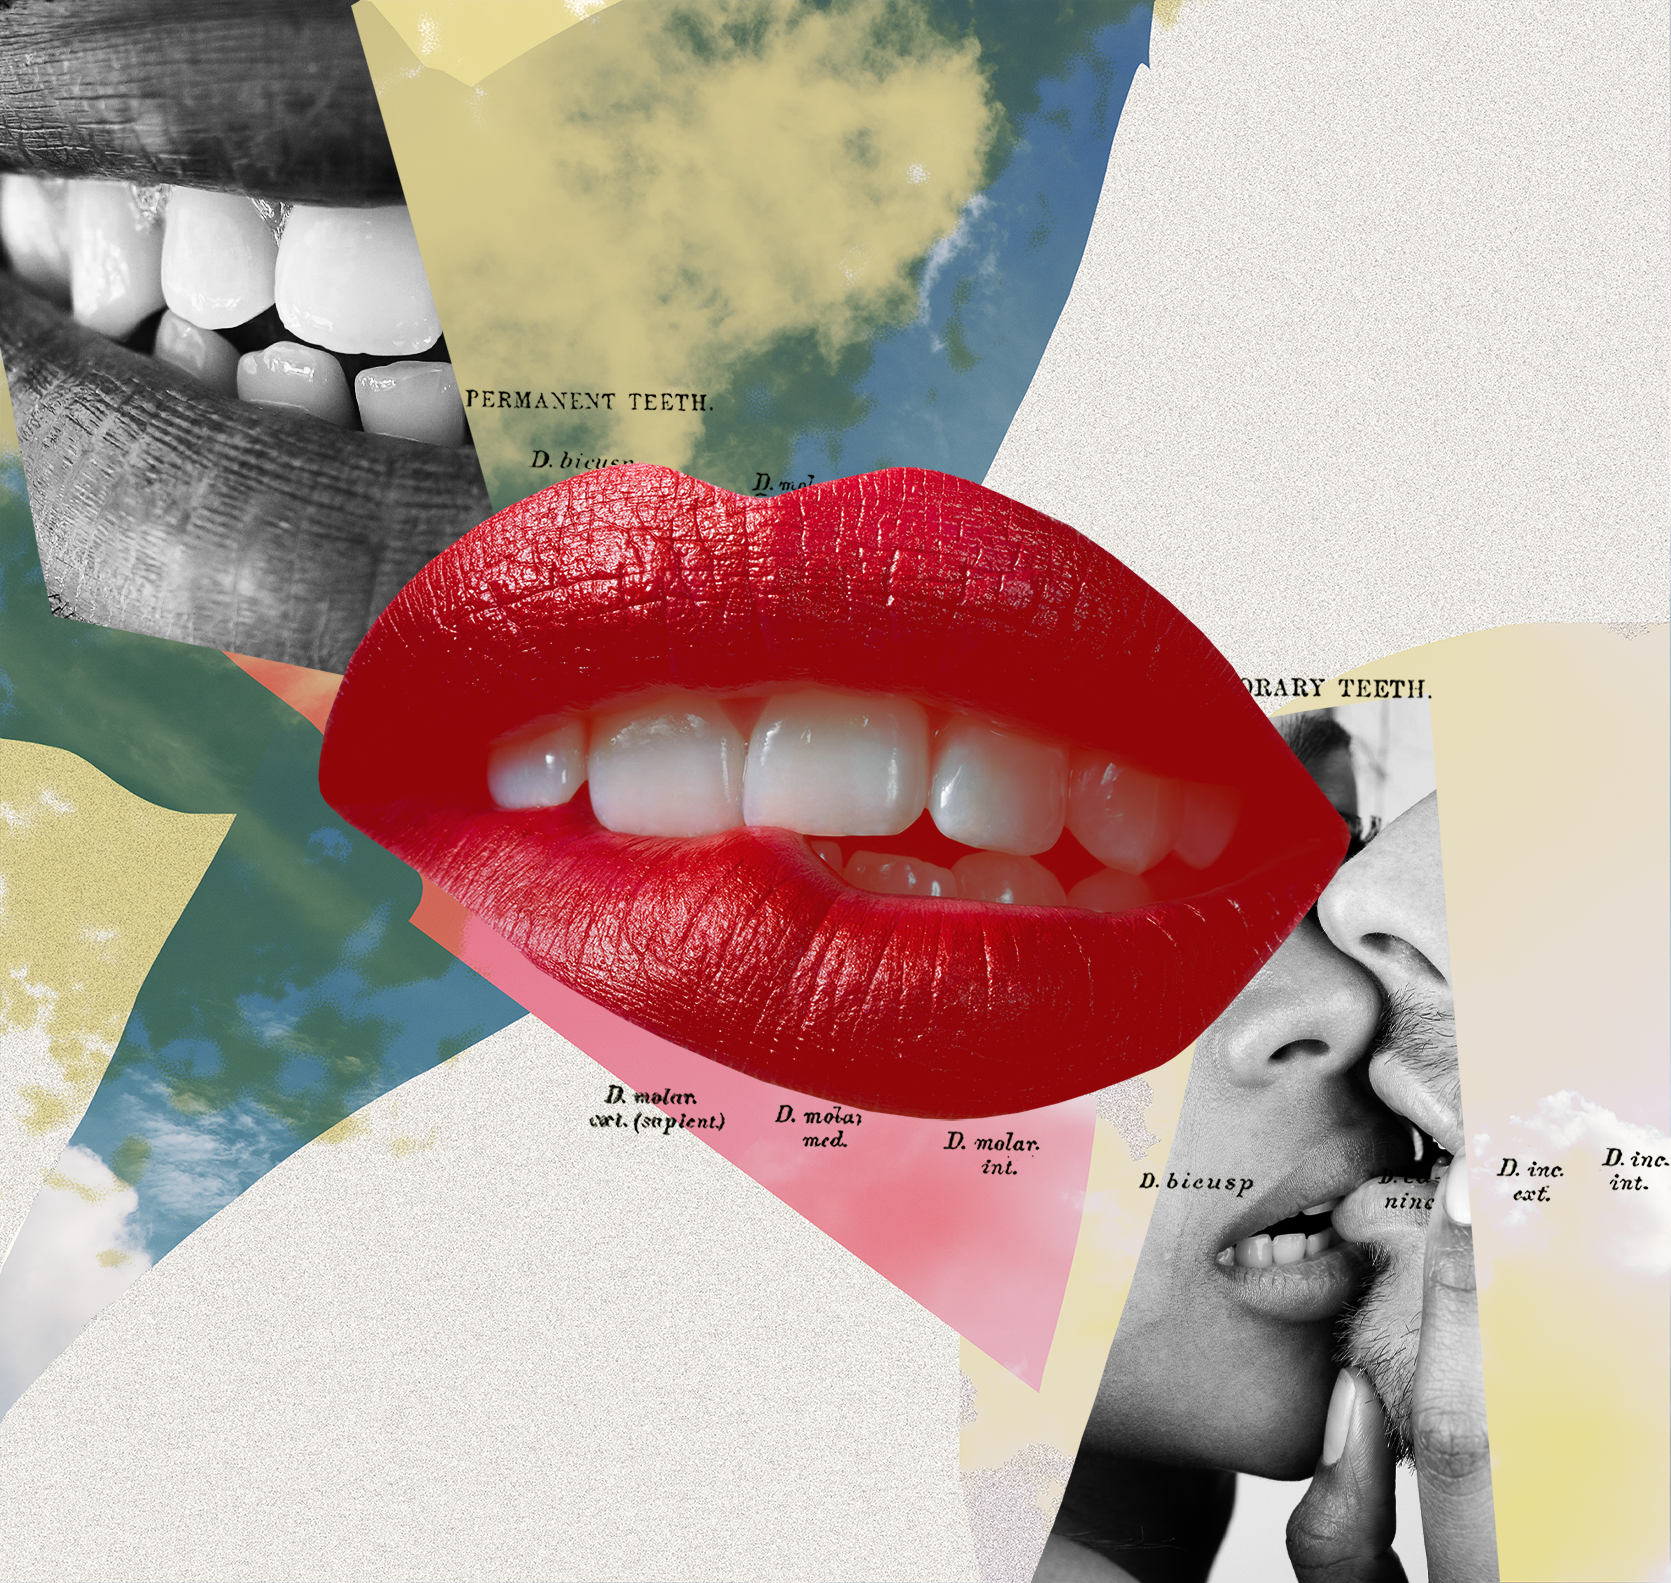 Dentile Sex - What Is Odontophilia? The Teeth Fetish, Explained by Sex Experts.